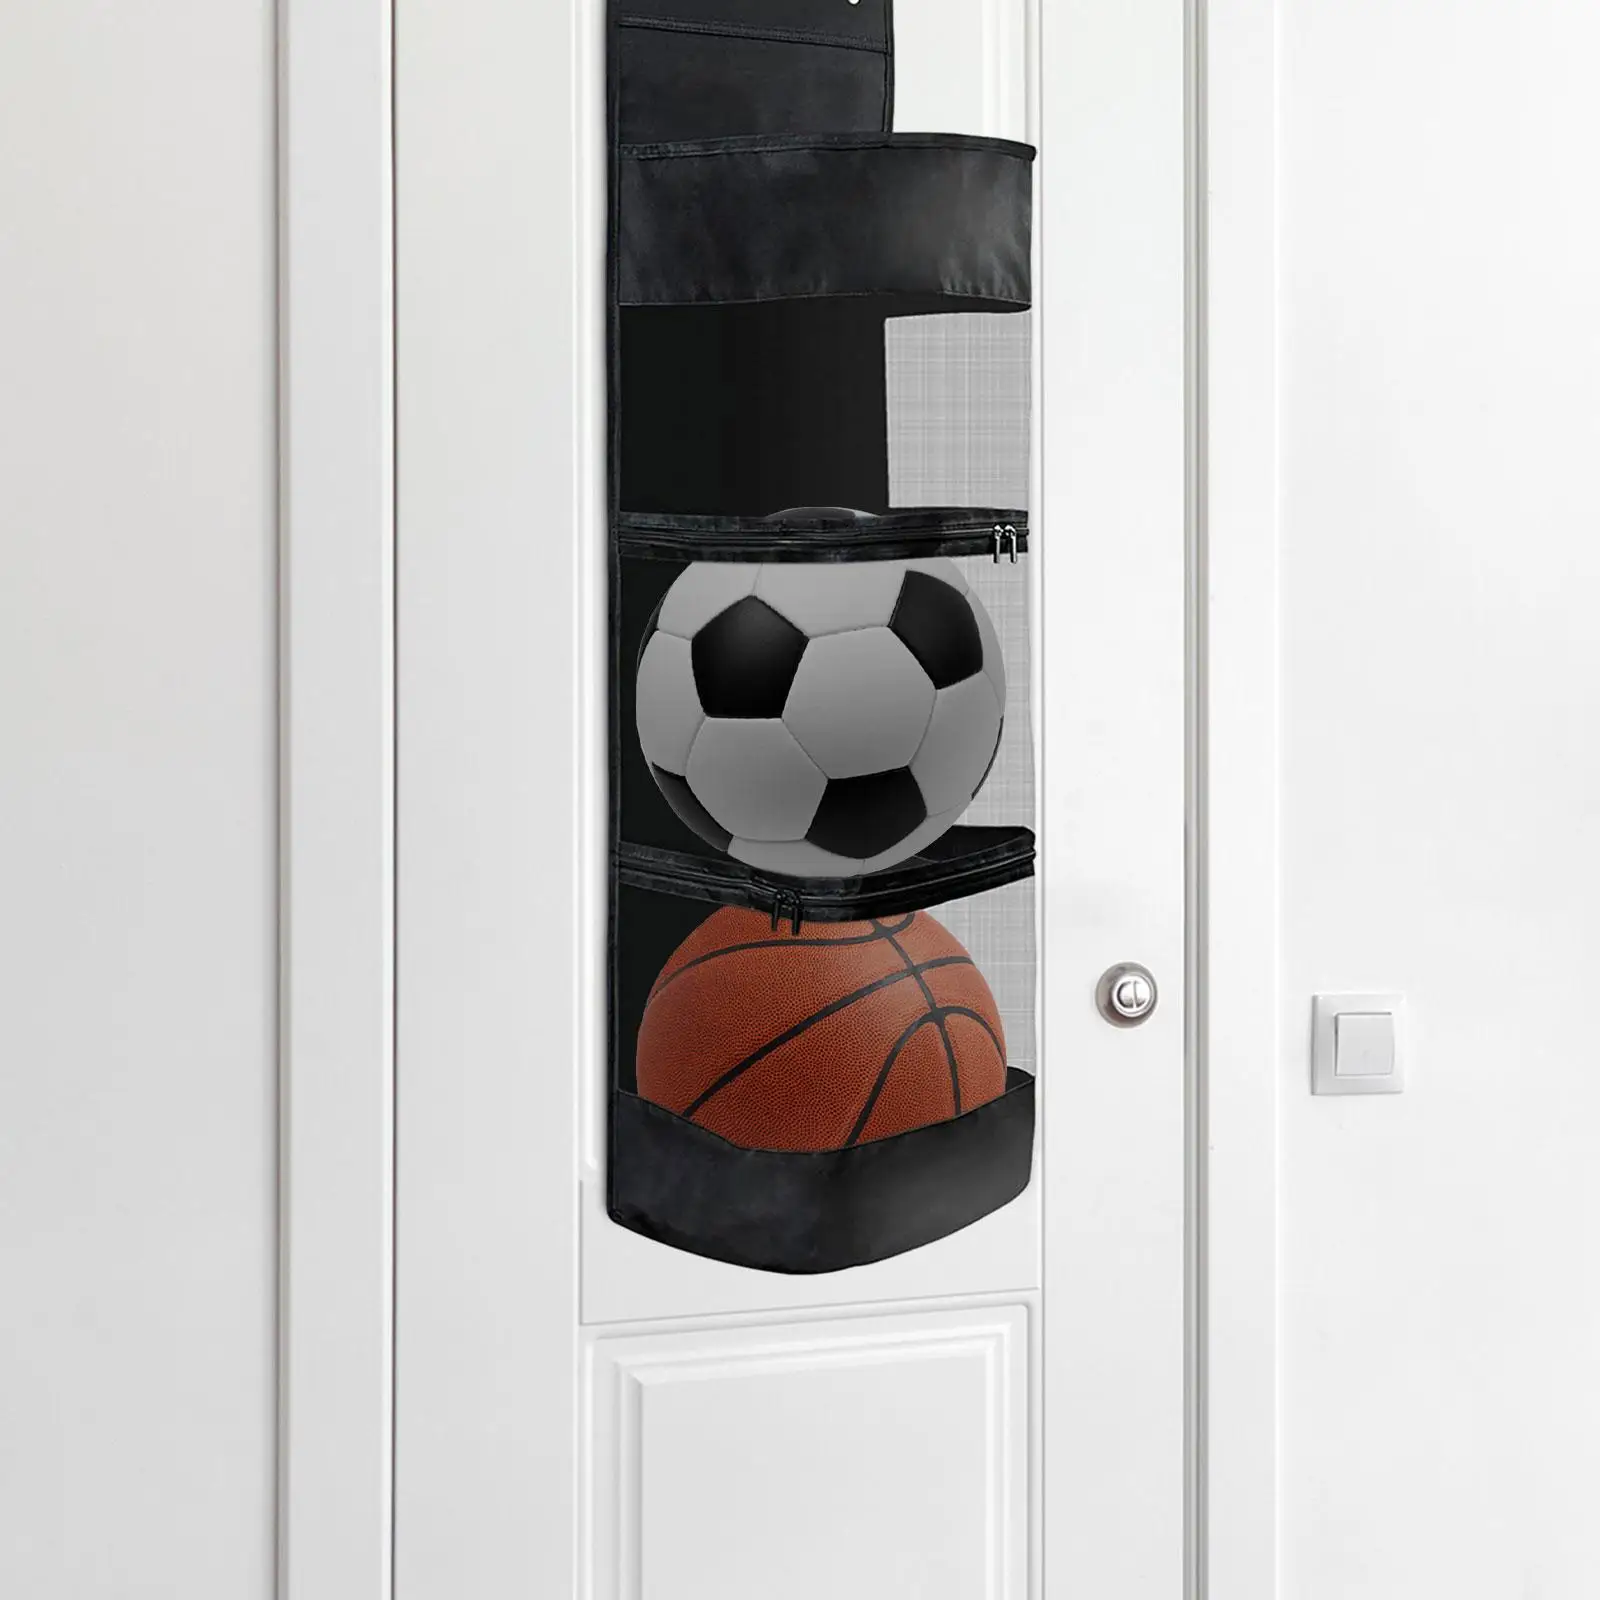 over Door Hanging Organizer Back of Door Storage Organizer Large Pockets for Socks Sports Gear Soccer Volleyball Toy Storage